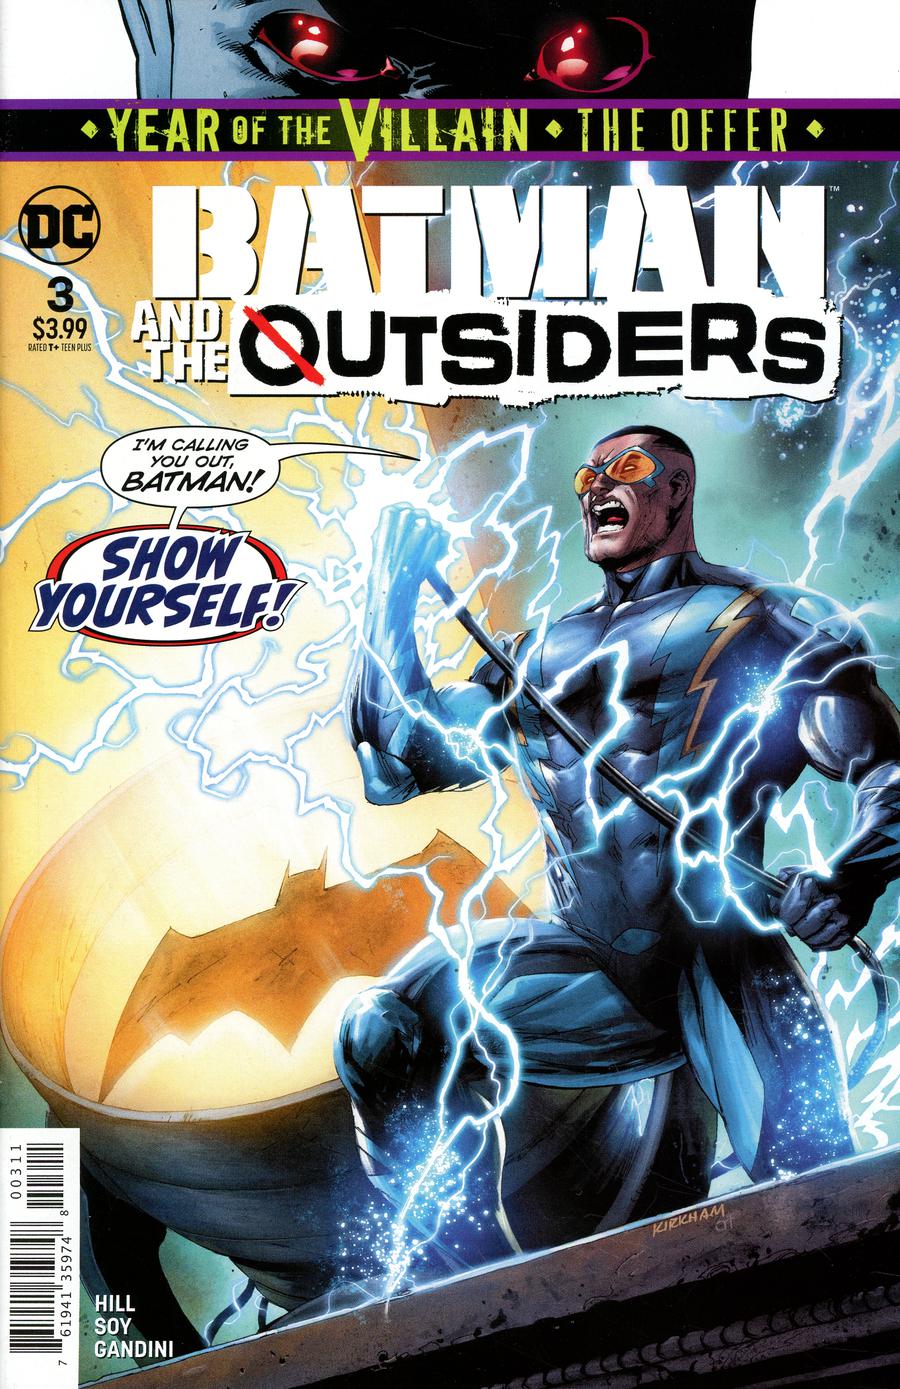 Batman And The Outsiders Vol 3 #3 Cover A Regular Dexter Soy Cover (Year Of The Villain The Offer Tie-In)